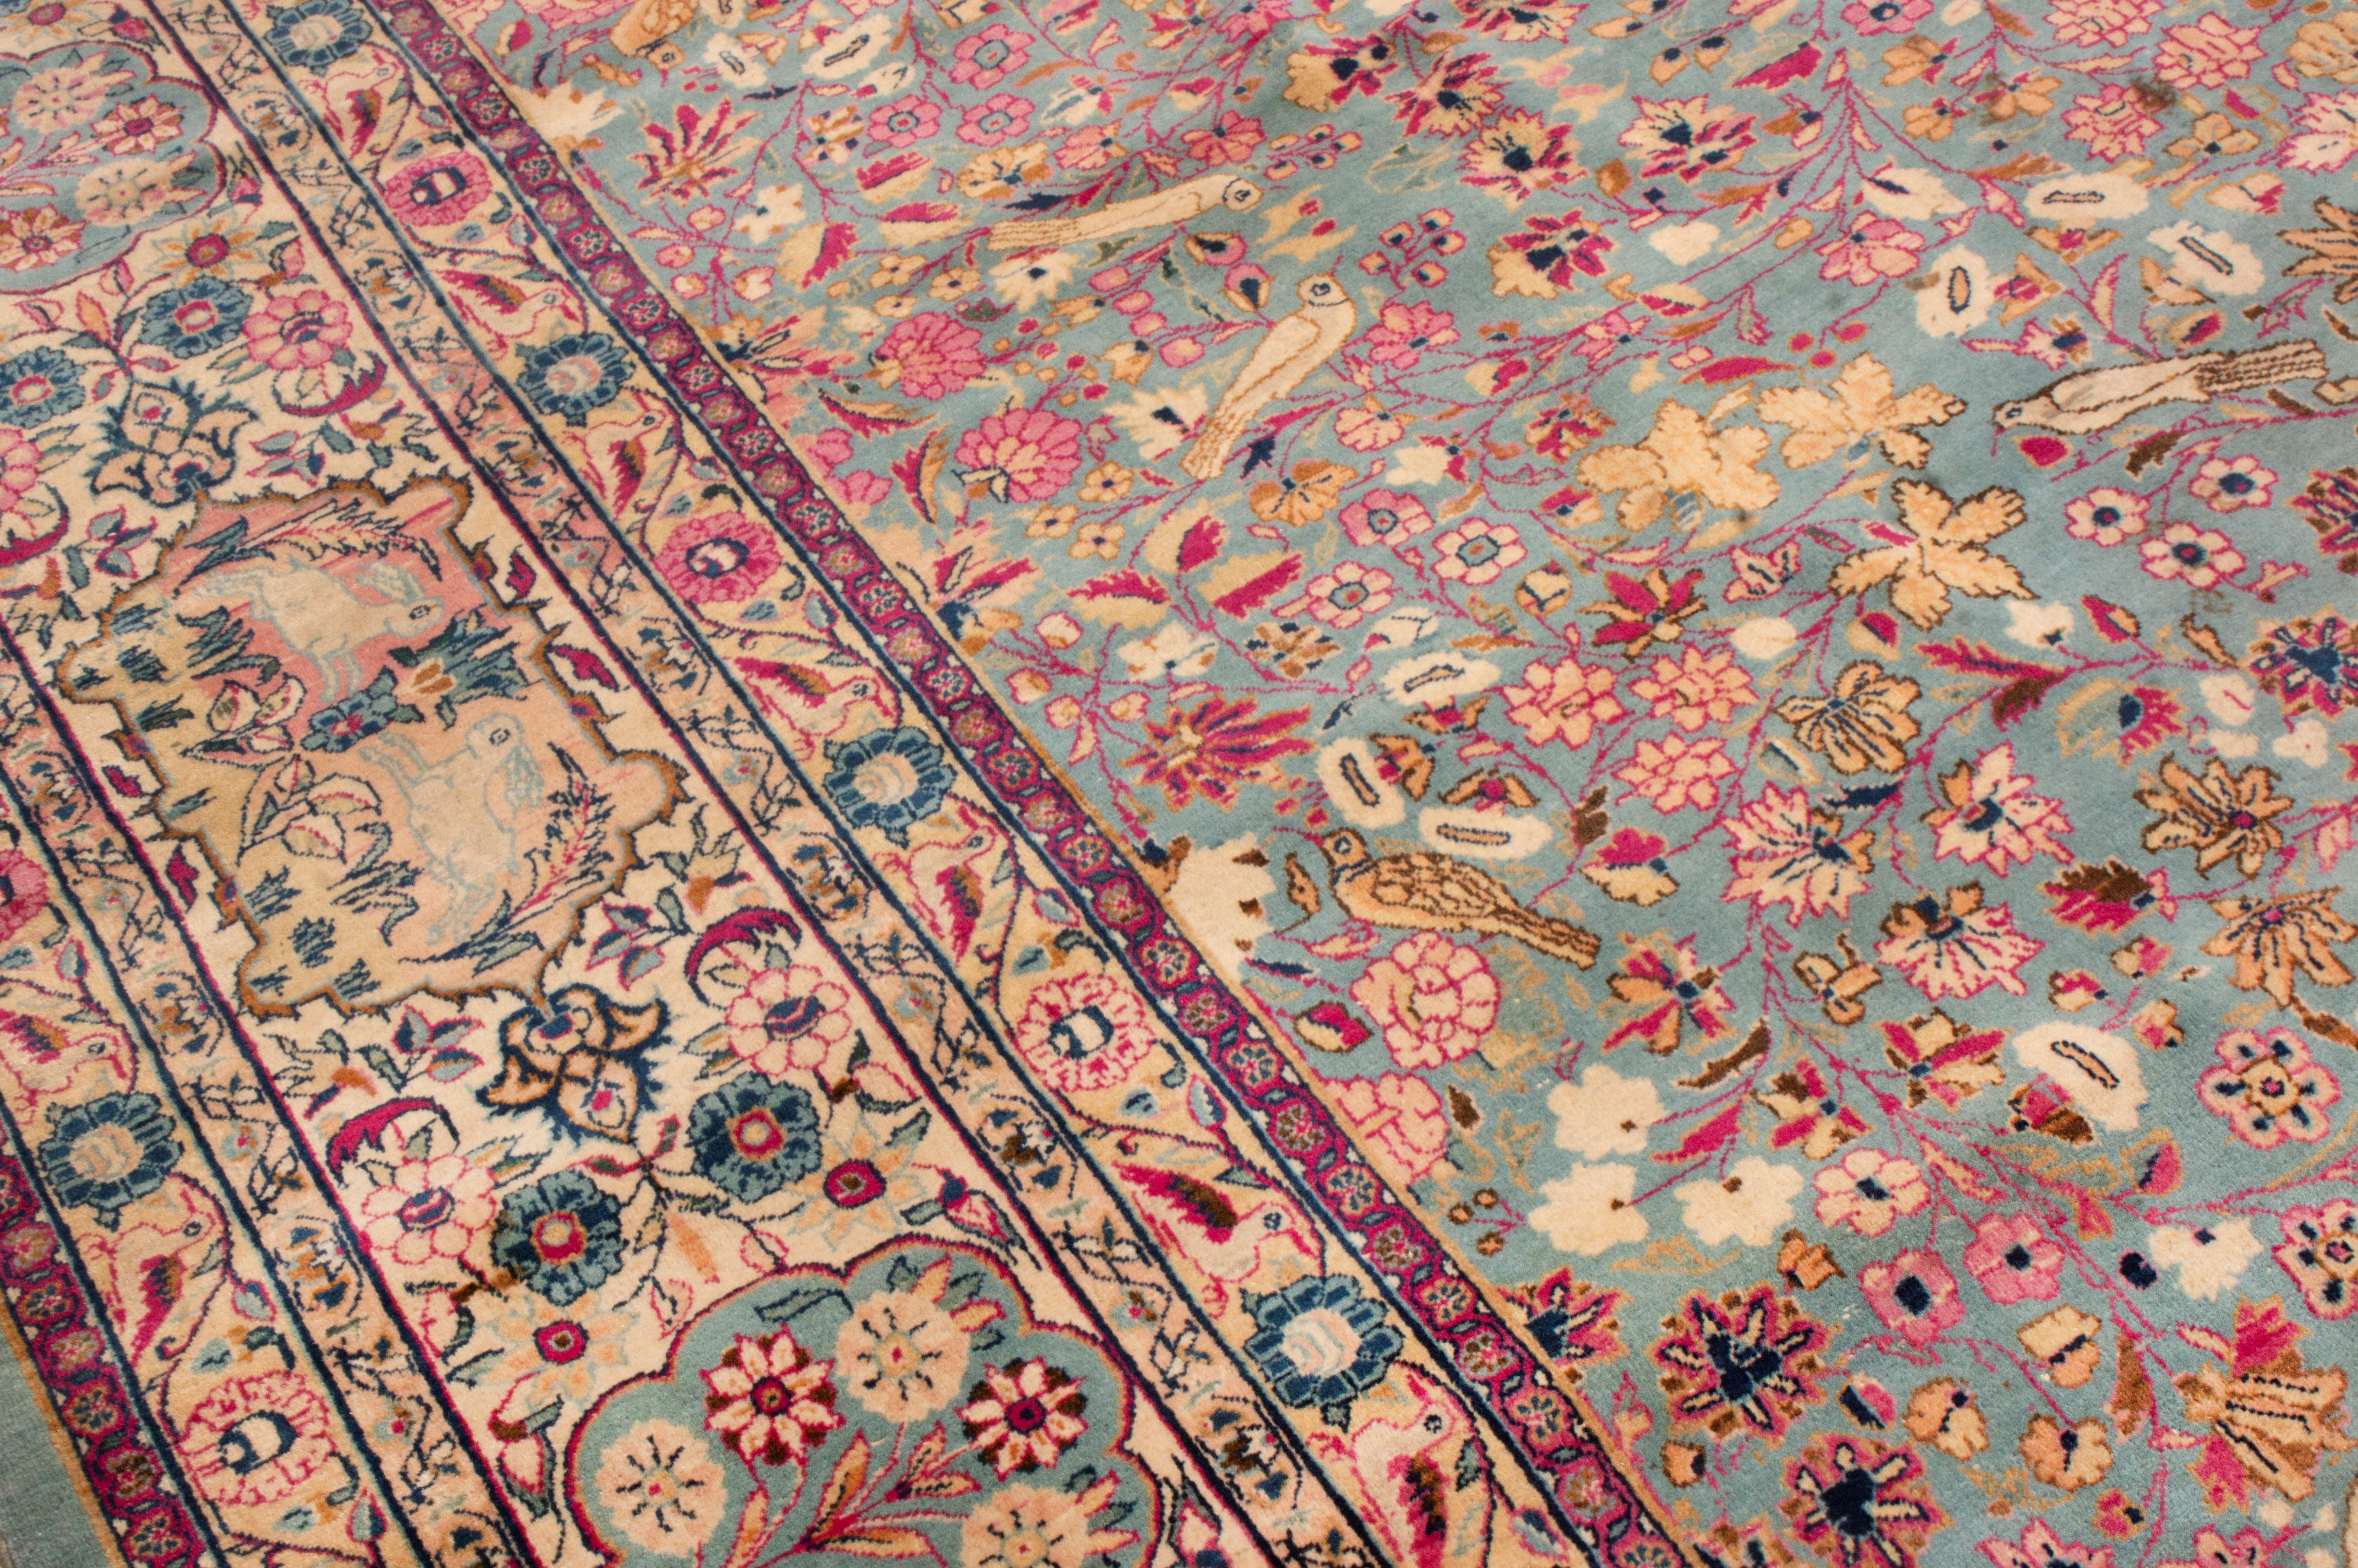 Persian Antique Signature Kashan Pink and Blue Wool Rug with All-Over Floral Patterns